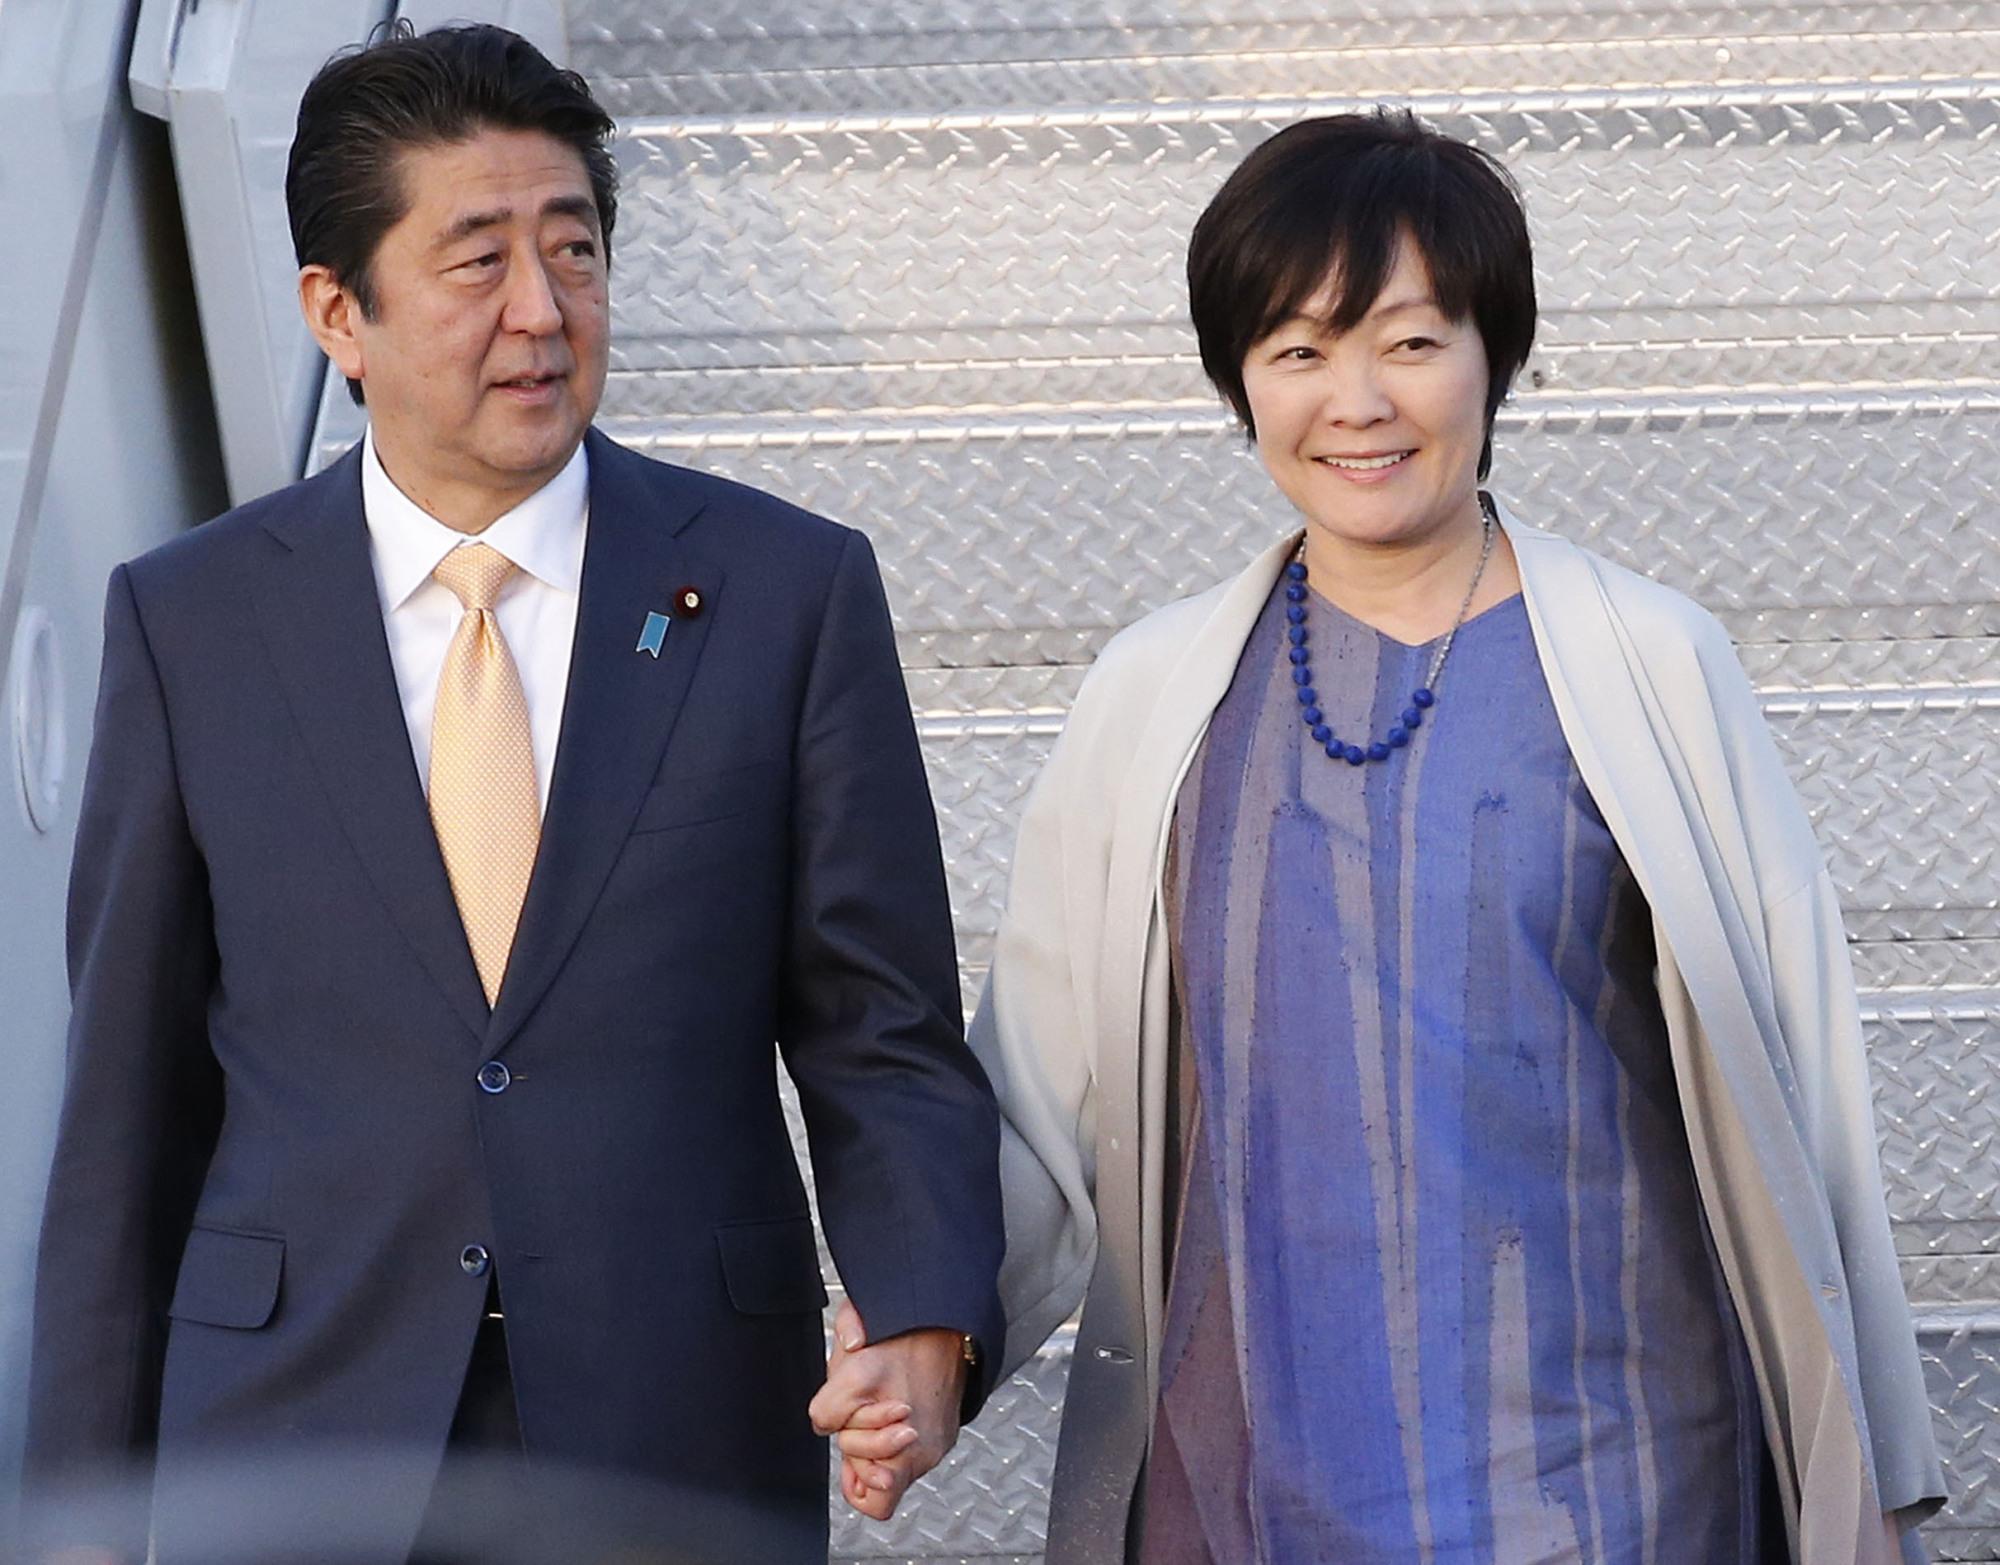 Prime Minister Shinzo Abe and his wife, Akie, exit Air Force One after arriving in Florida with U.S. President Donald Trump on Feb. 10. | AP